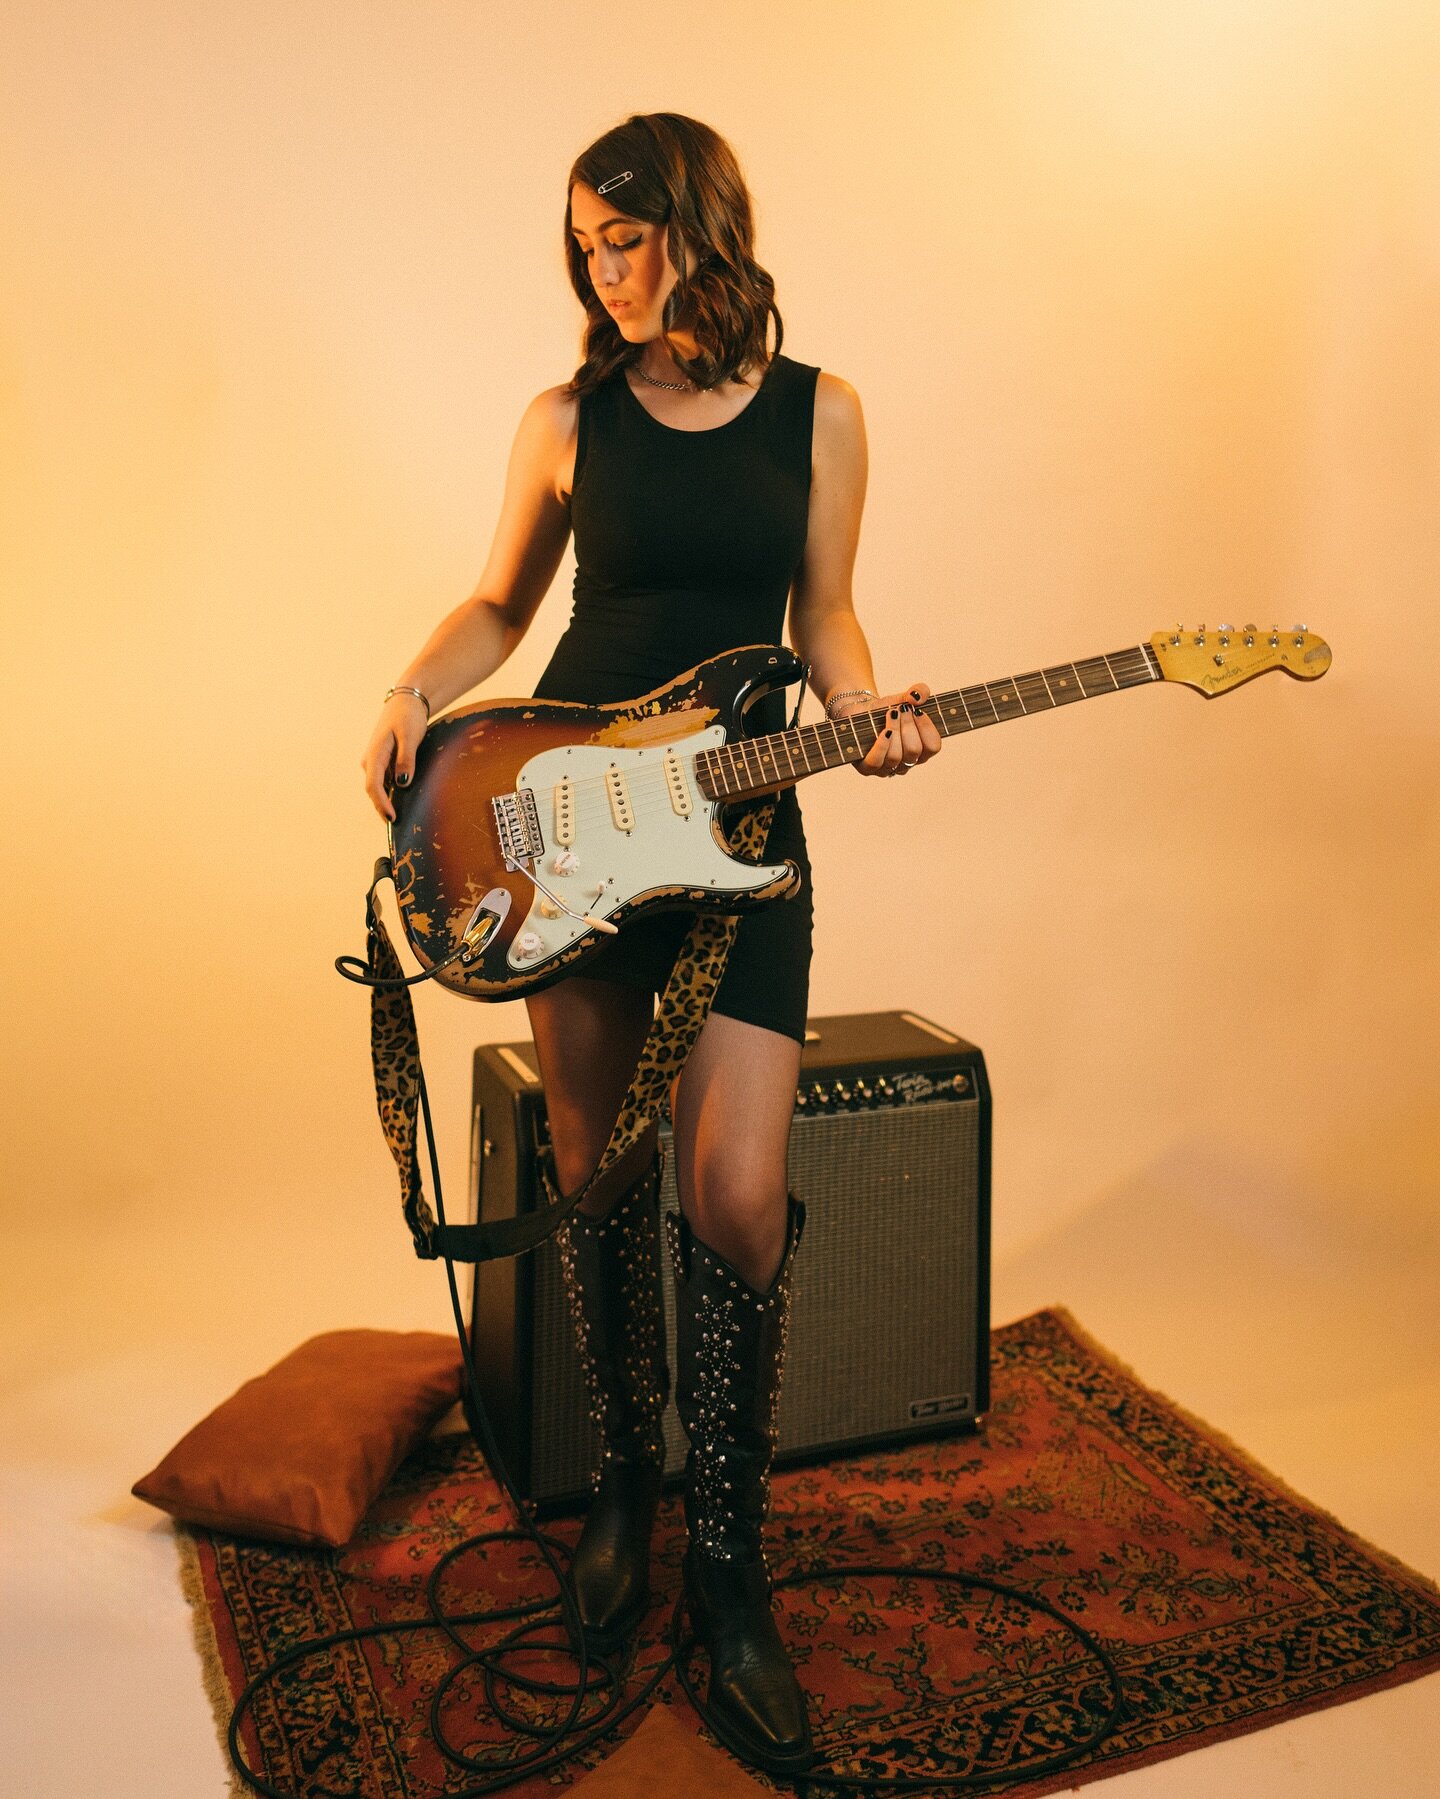 Happy Thanksgiving ya&rsquo;ll 🍁
So thankful for all you guys!!! Thanks for supporting me and always being there. Means everything!!! Much looove 🍂
.
. @fender @fenderbilly &lt;3
.
📸 @nik_z_photo 
#thanksgiving #fall #fender #strat #fyp #twinrever